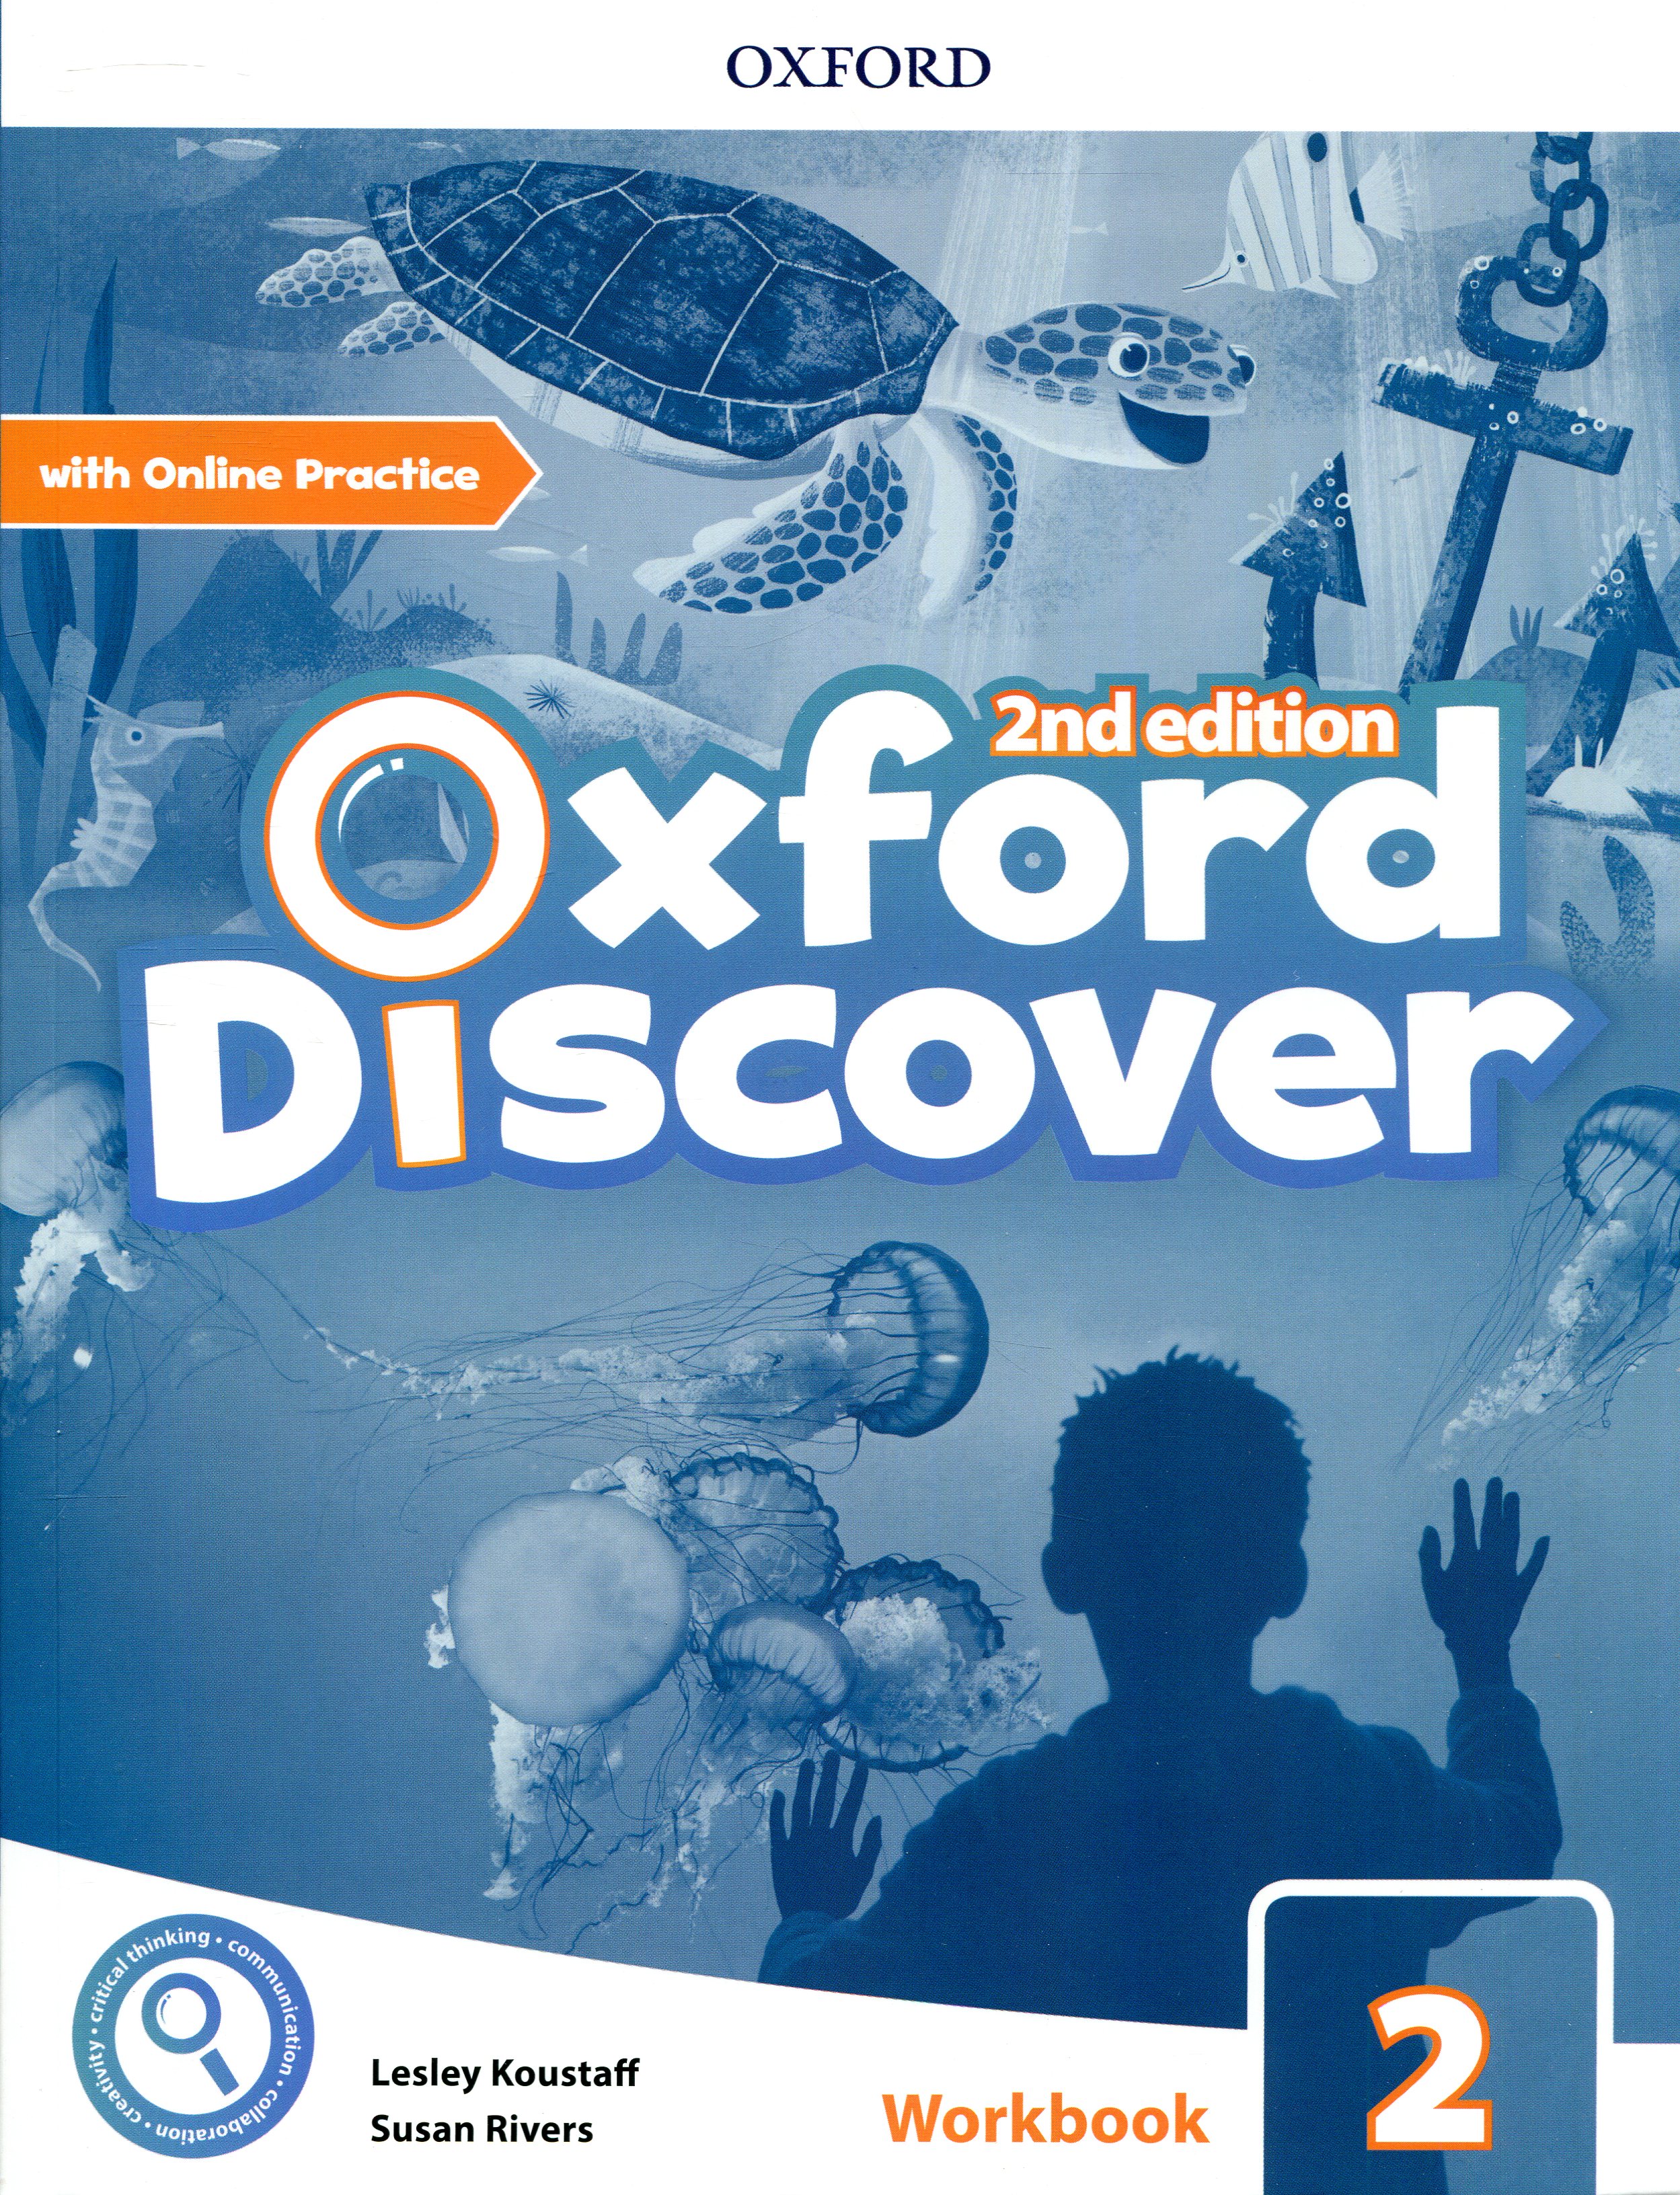 Discover workbook. Oxford discover 2 Edition 2. Oxford discover 1 student's book 2nd Edition. Oxford discover 1 student book 2nd Edition Audio. Oxford discover 3 2nd Edition.